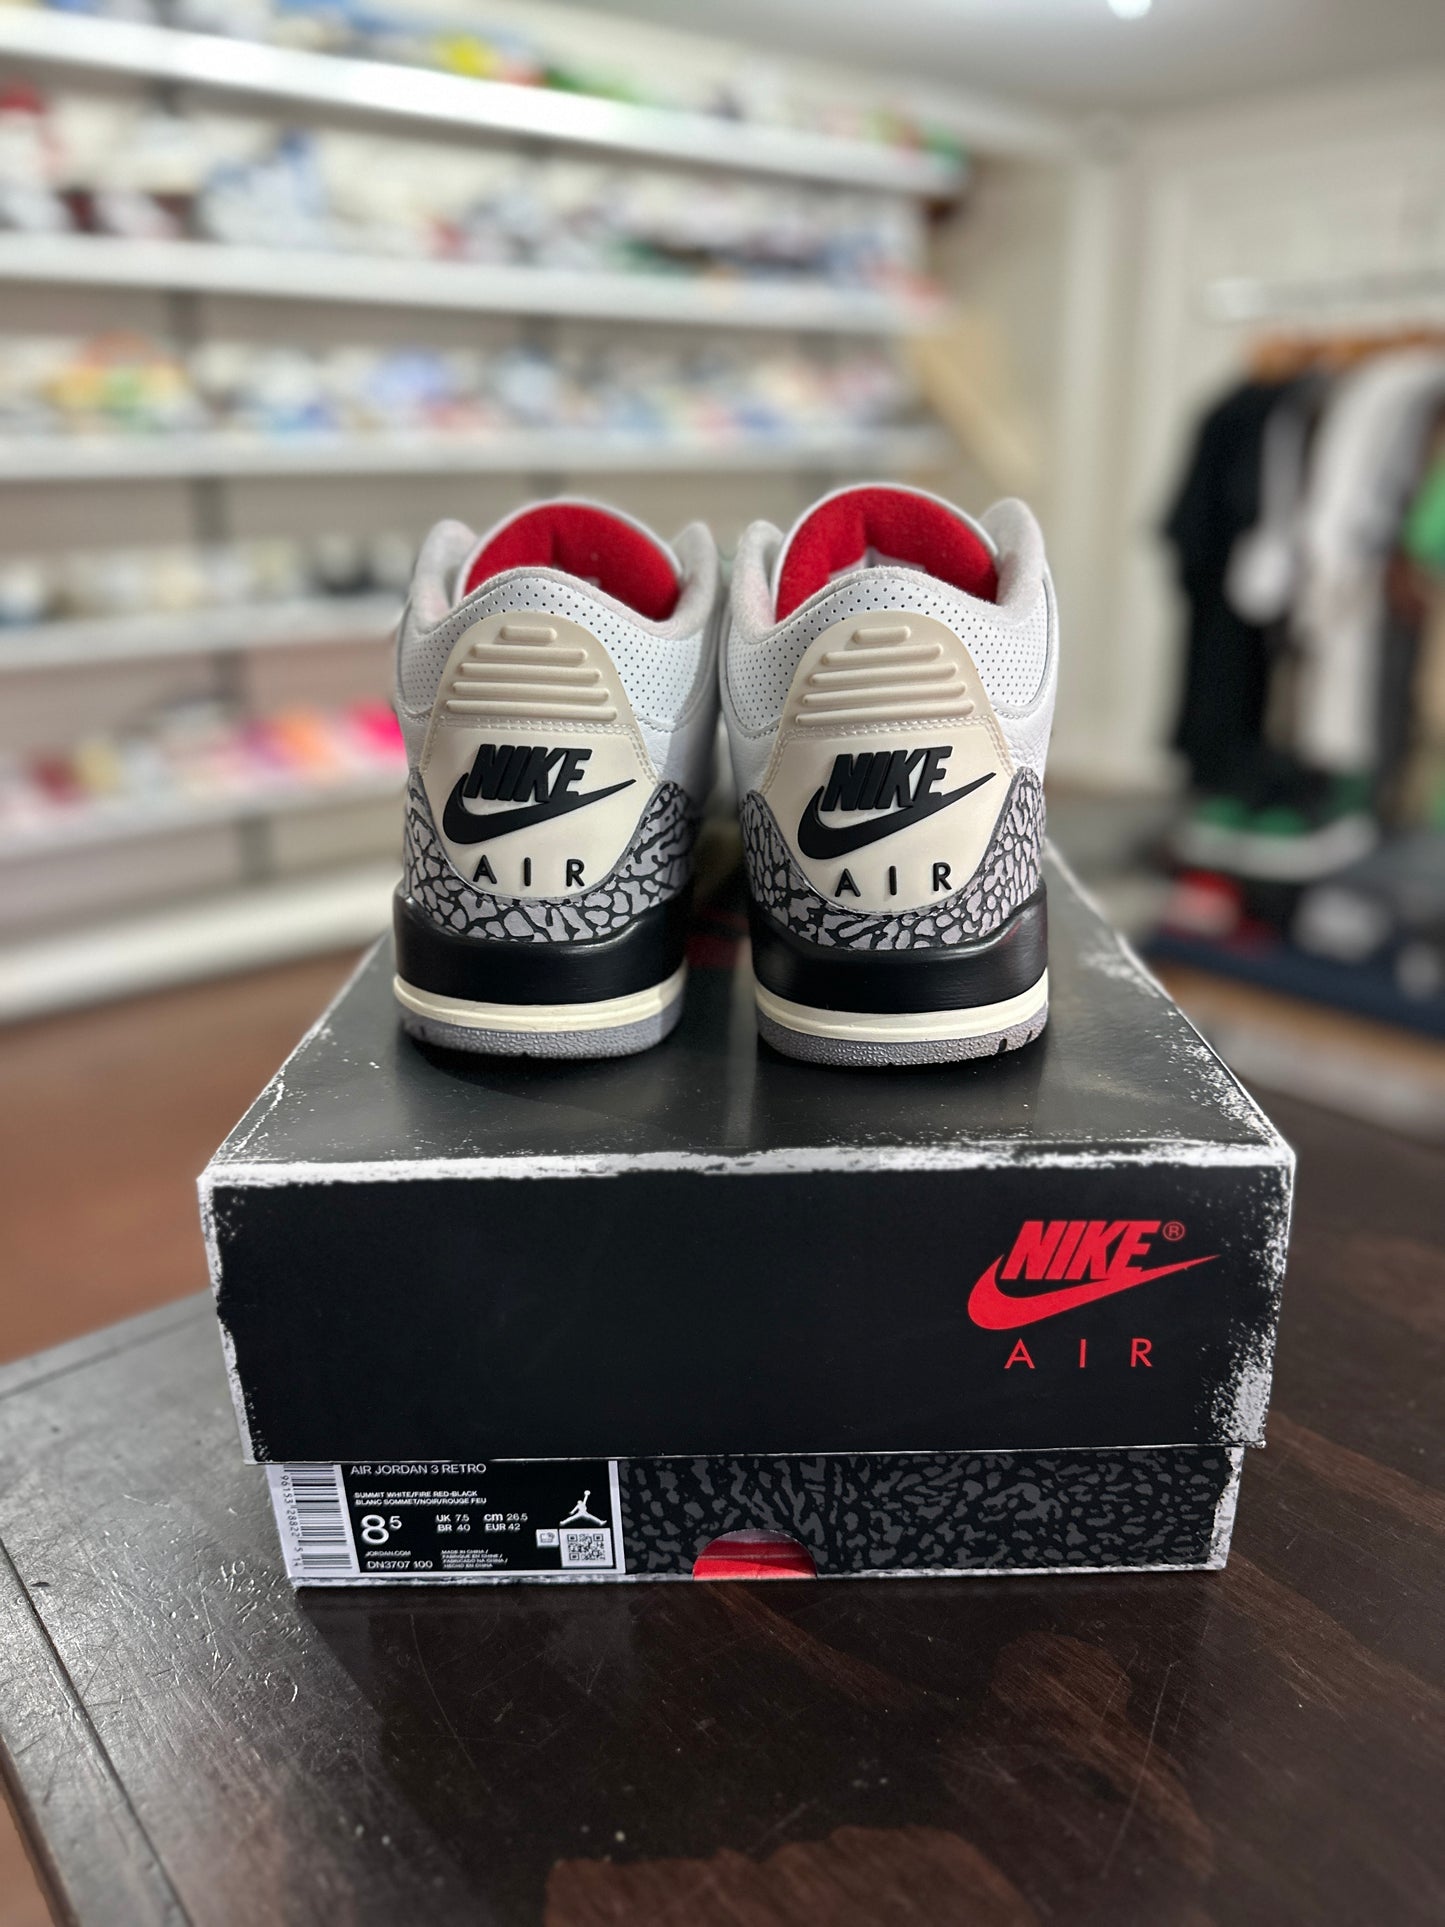 *USED* Air Jordan 3 Reimagined White Cement (size 8.5)